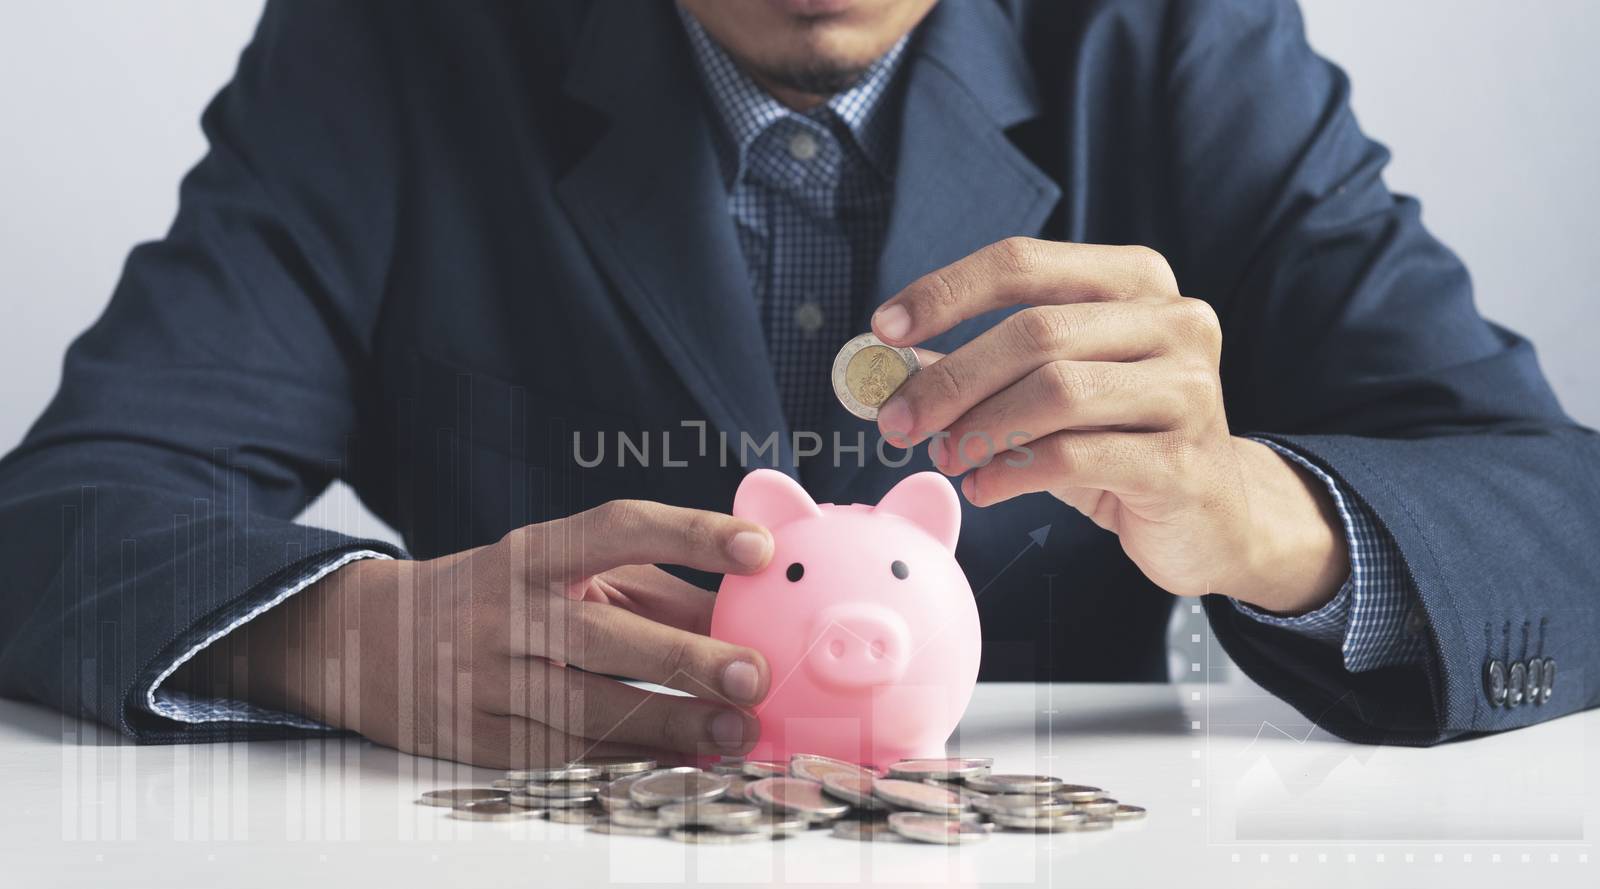 Hand of Business man holding coin put in piggy bank with money s by golfmhee